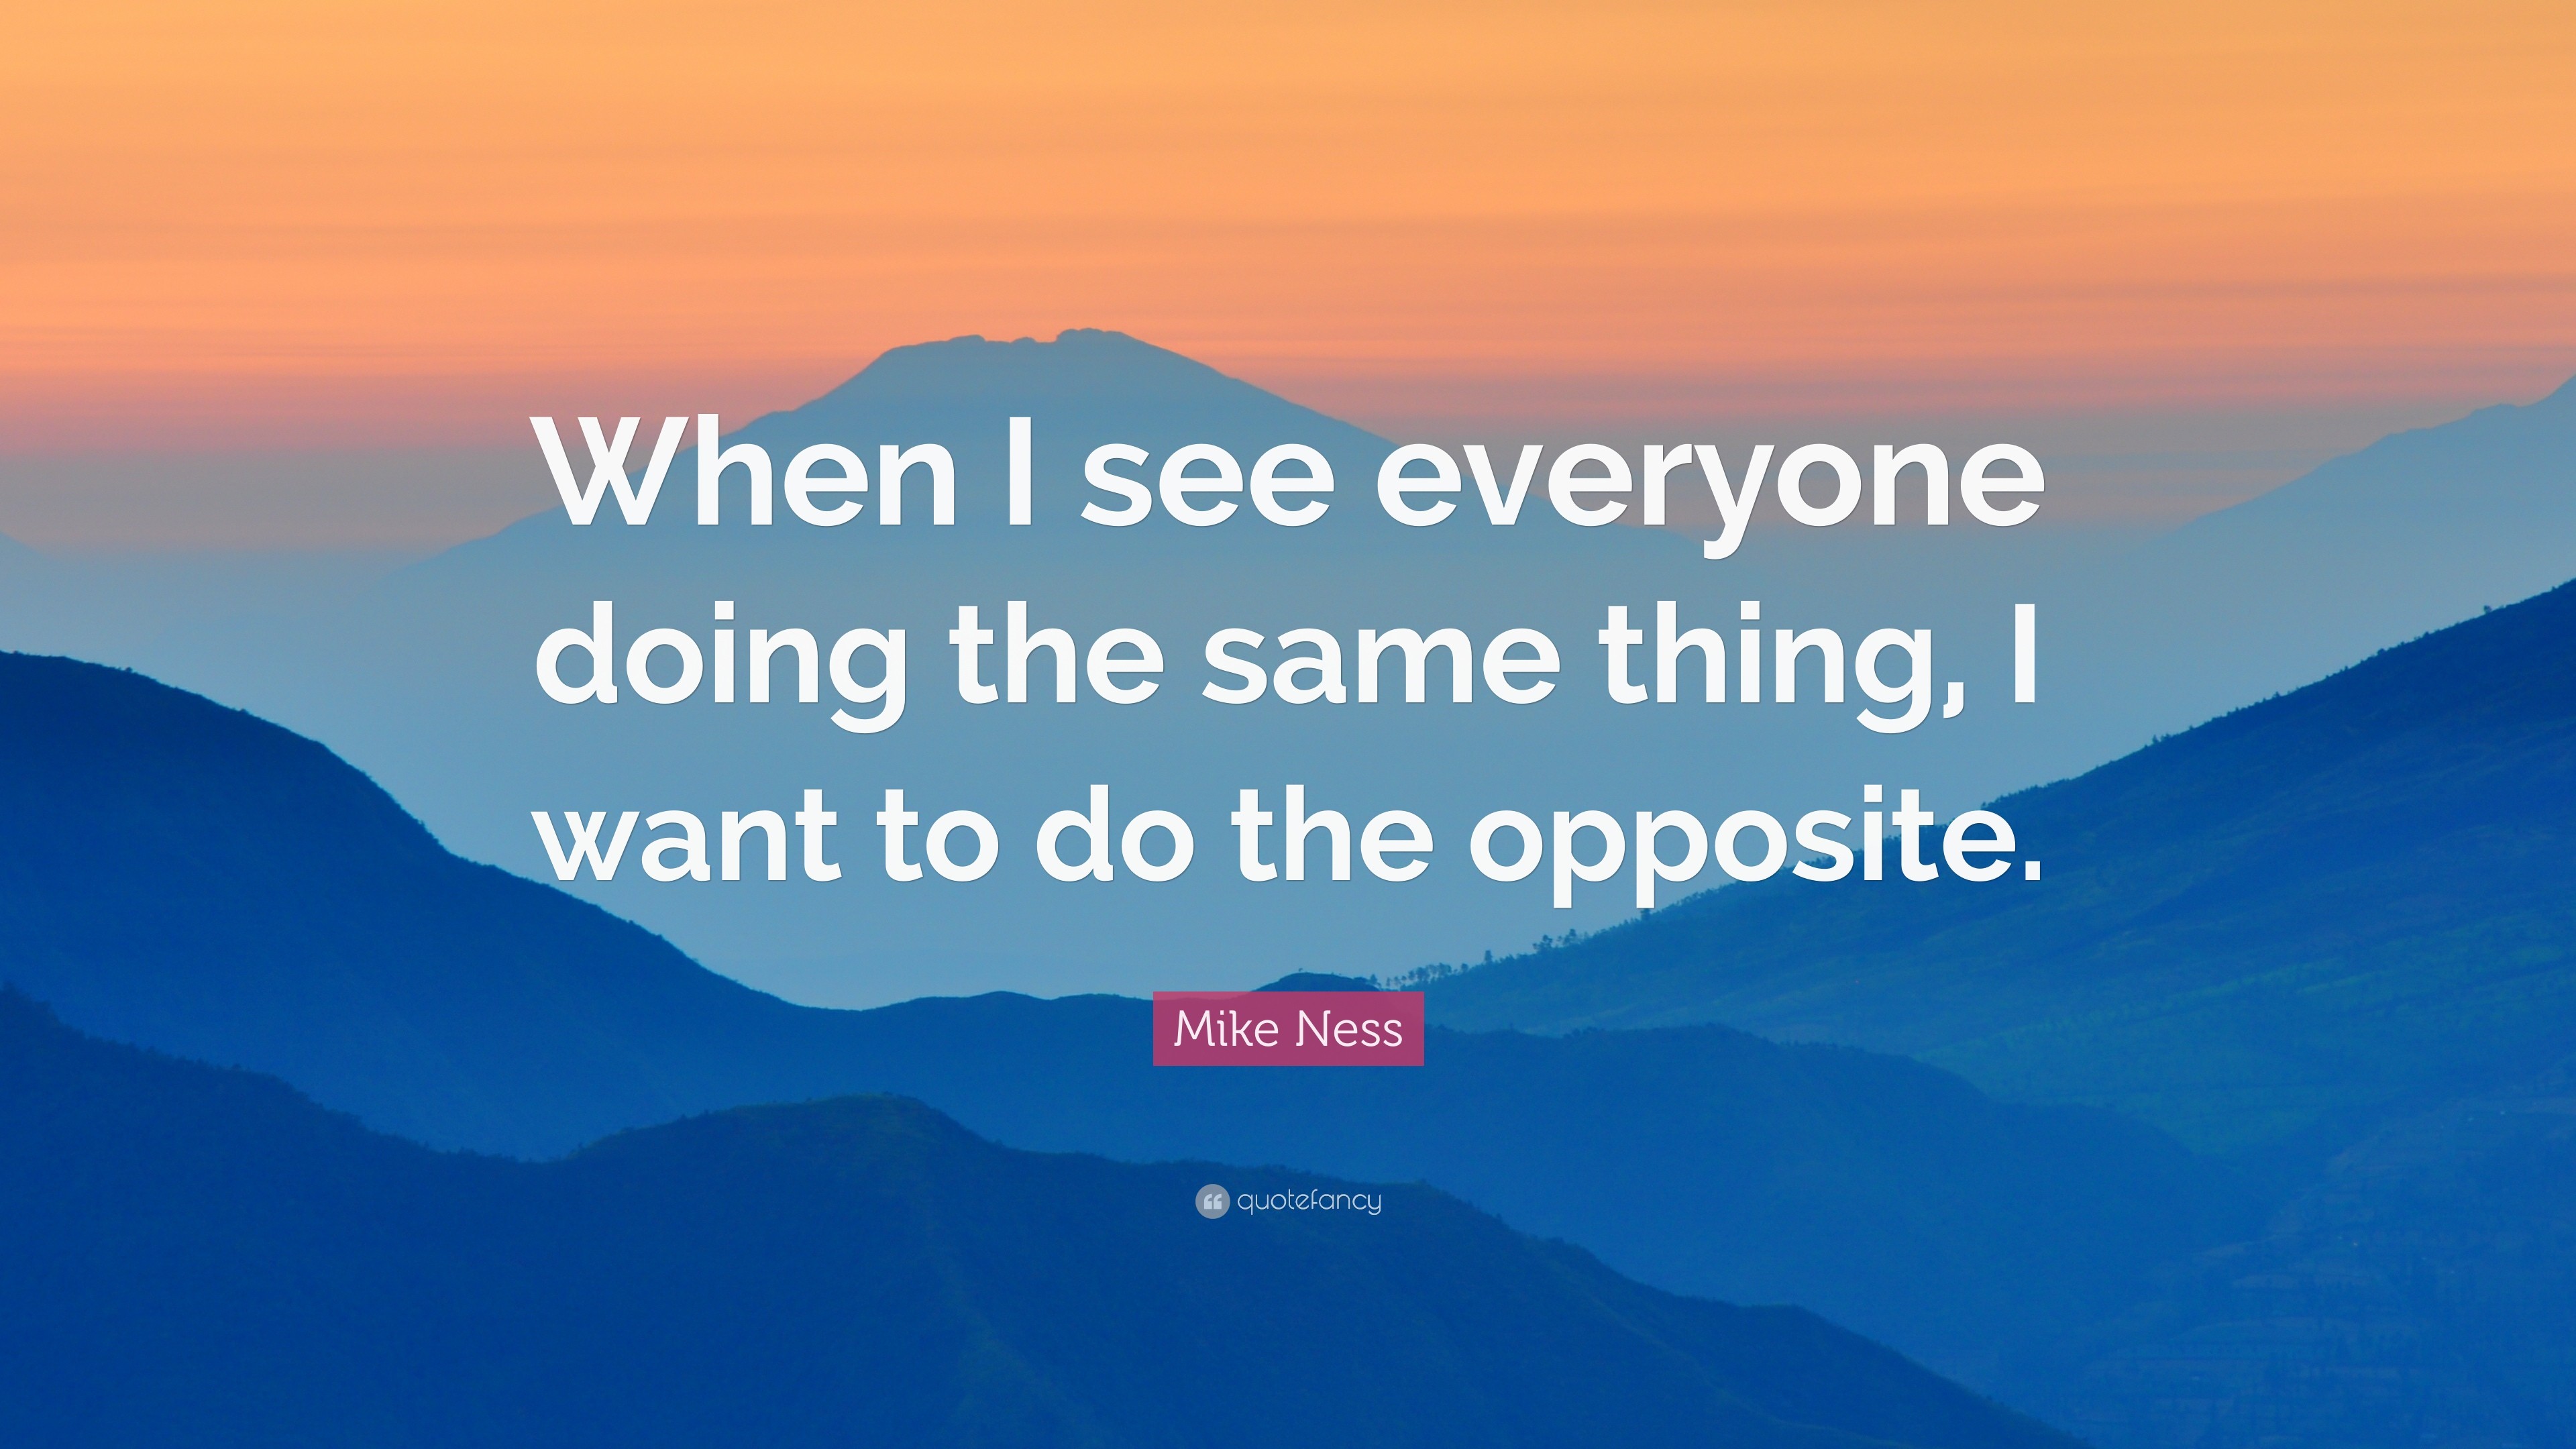 3840x2160 Mike Ness Quote: “When I see everyone doing the same thing, I want